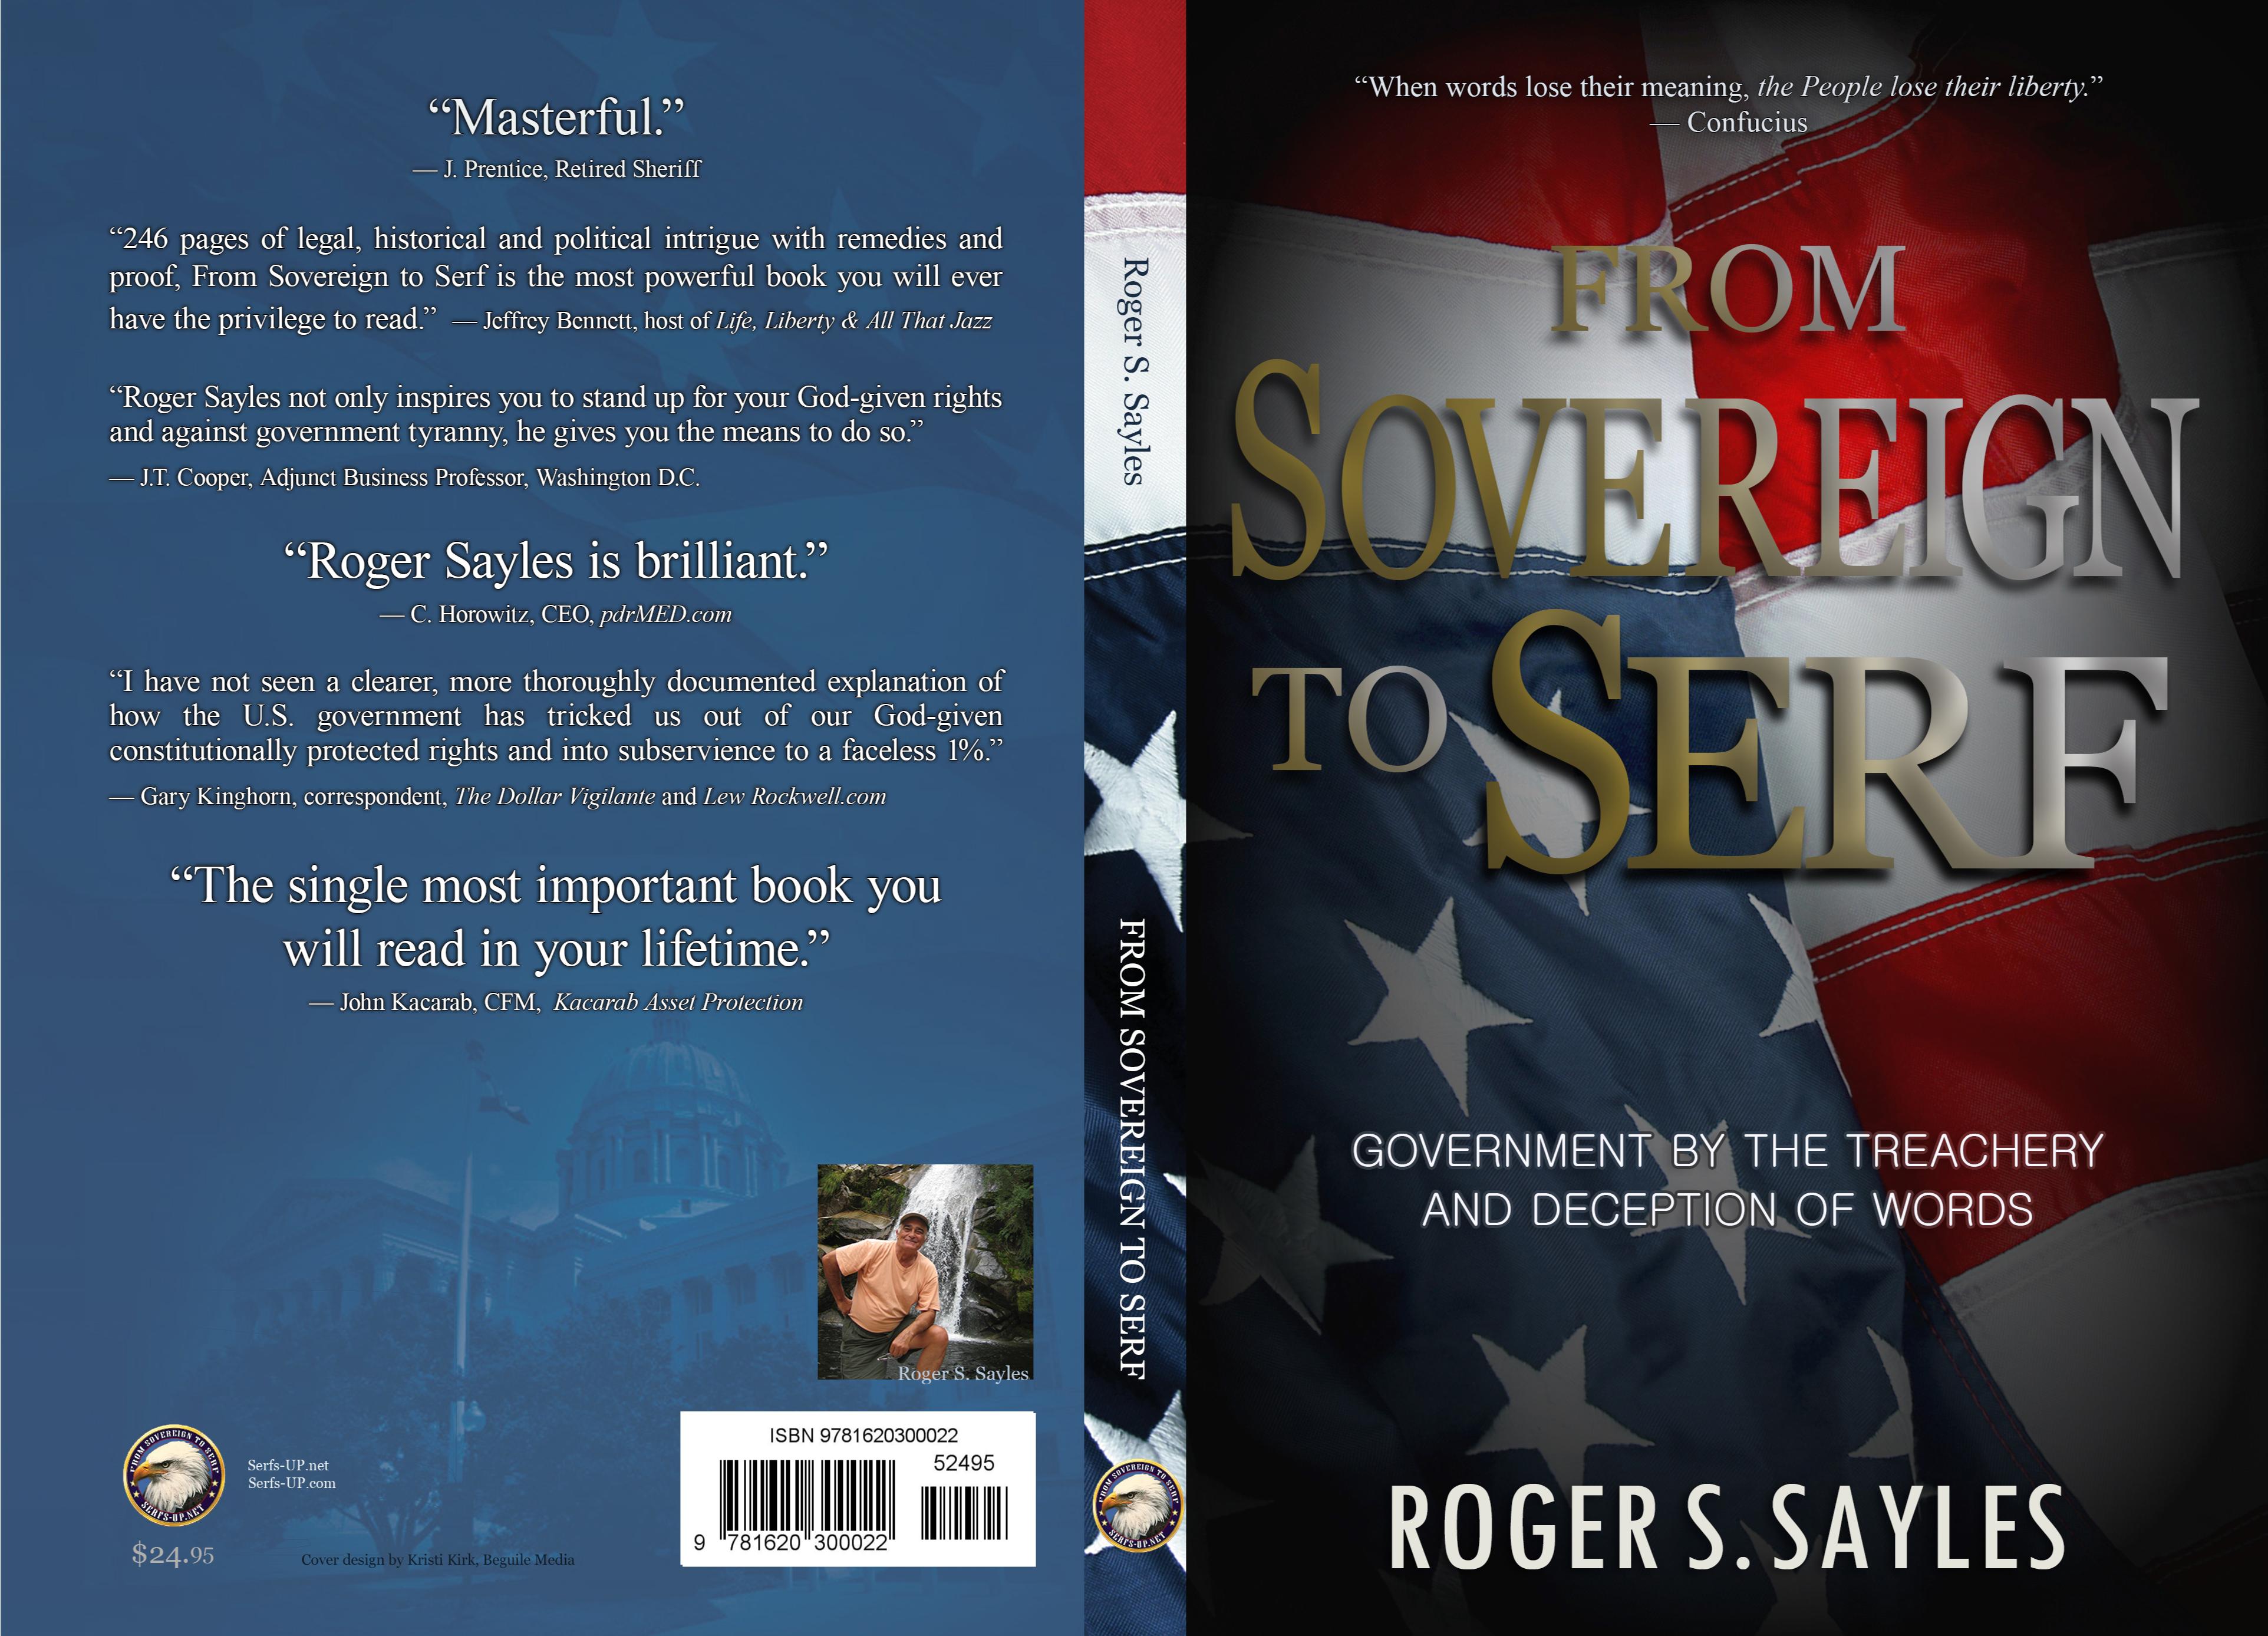 FROM SOVEREIGN TO SERF cover image